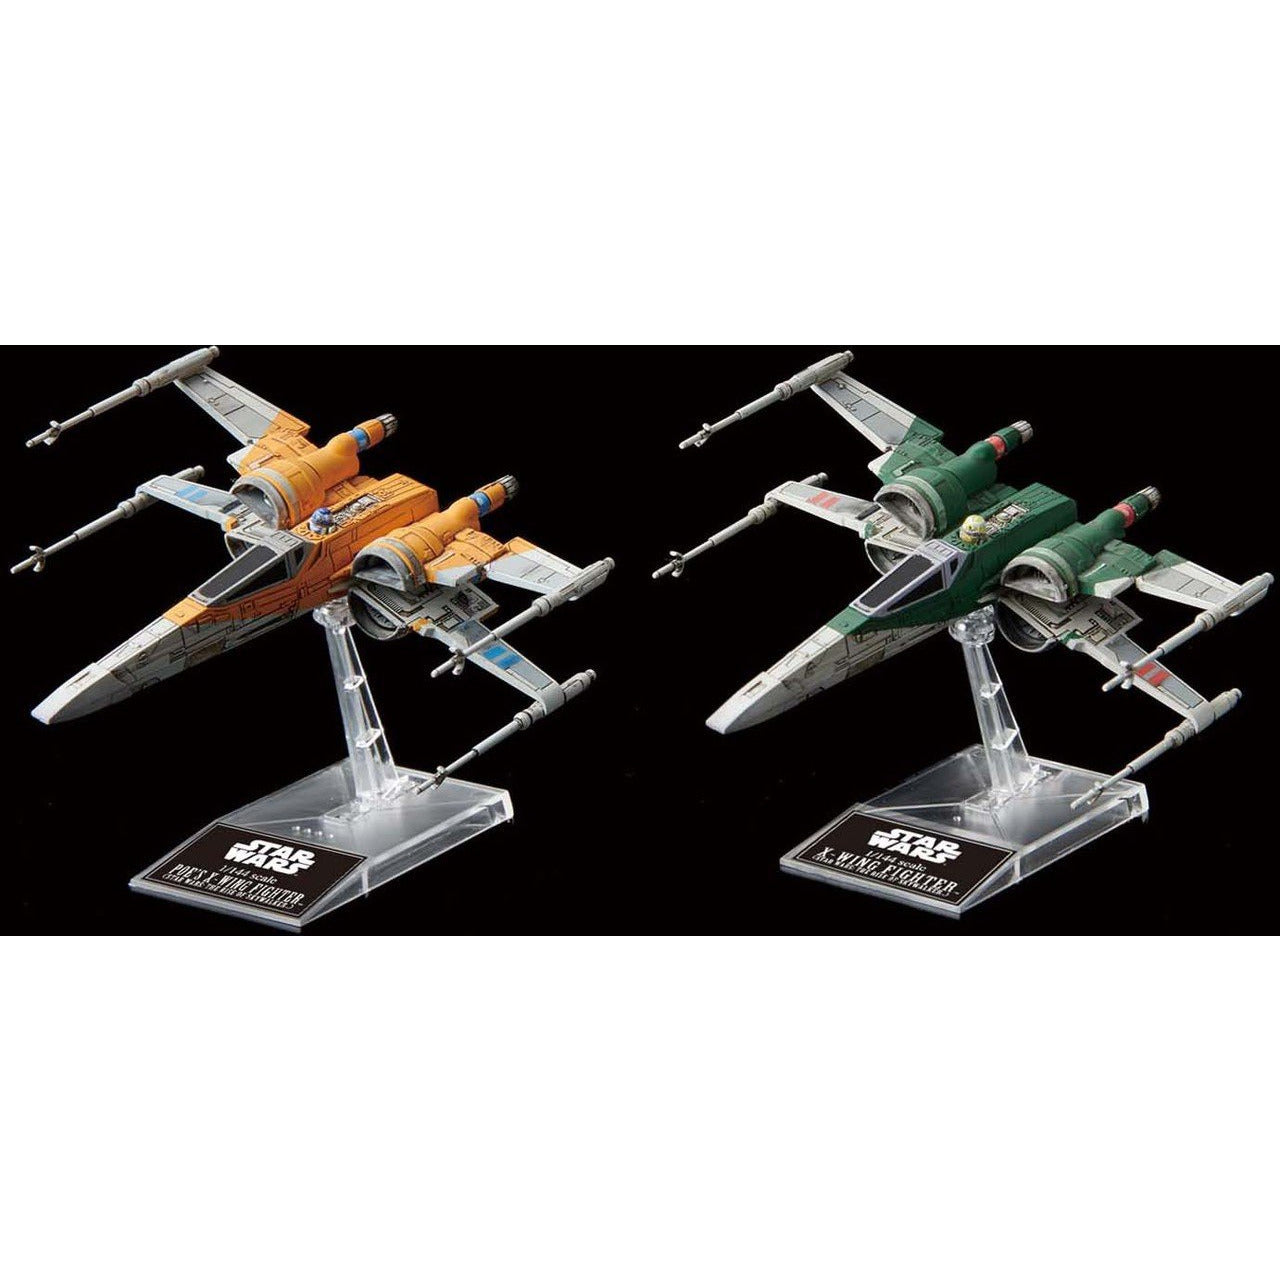 Poe's X-Wing Fighter & Resistance X-Wing Fighter 1/144 (Set of 2 Models) Star Wars Model Kit #5059231 by Bandai